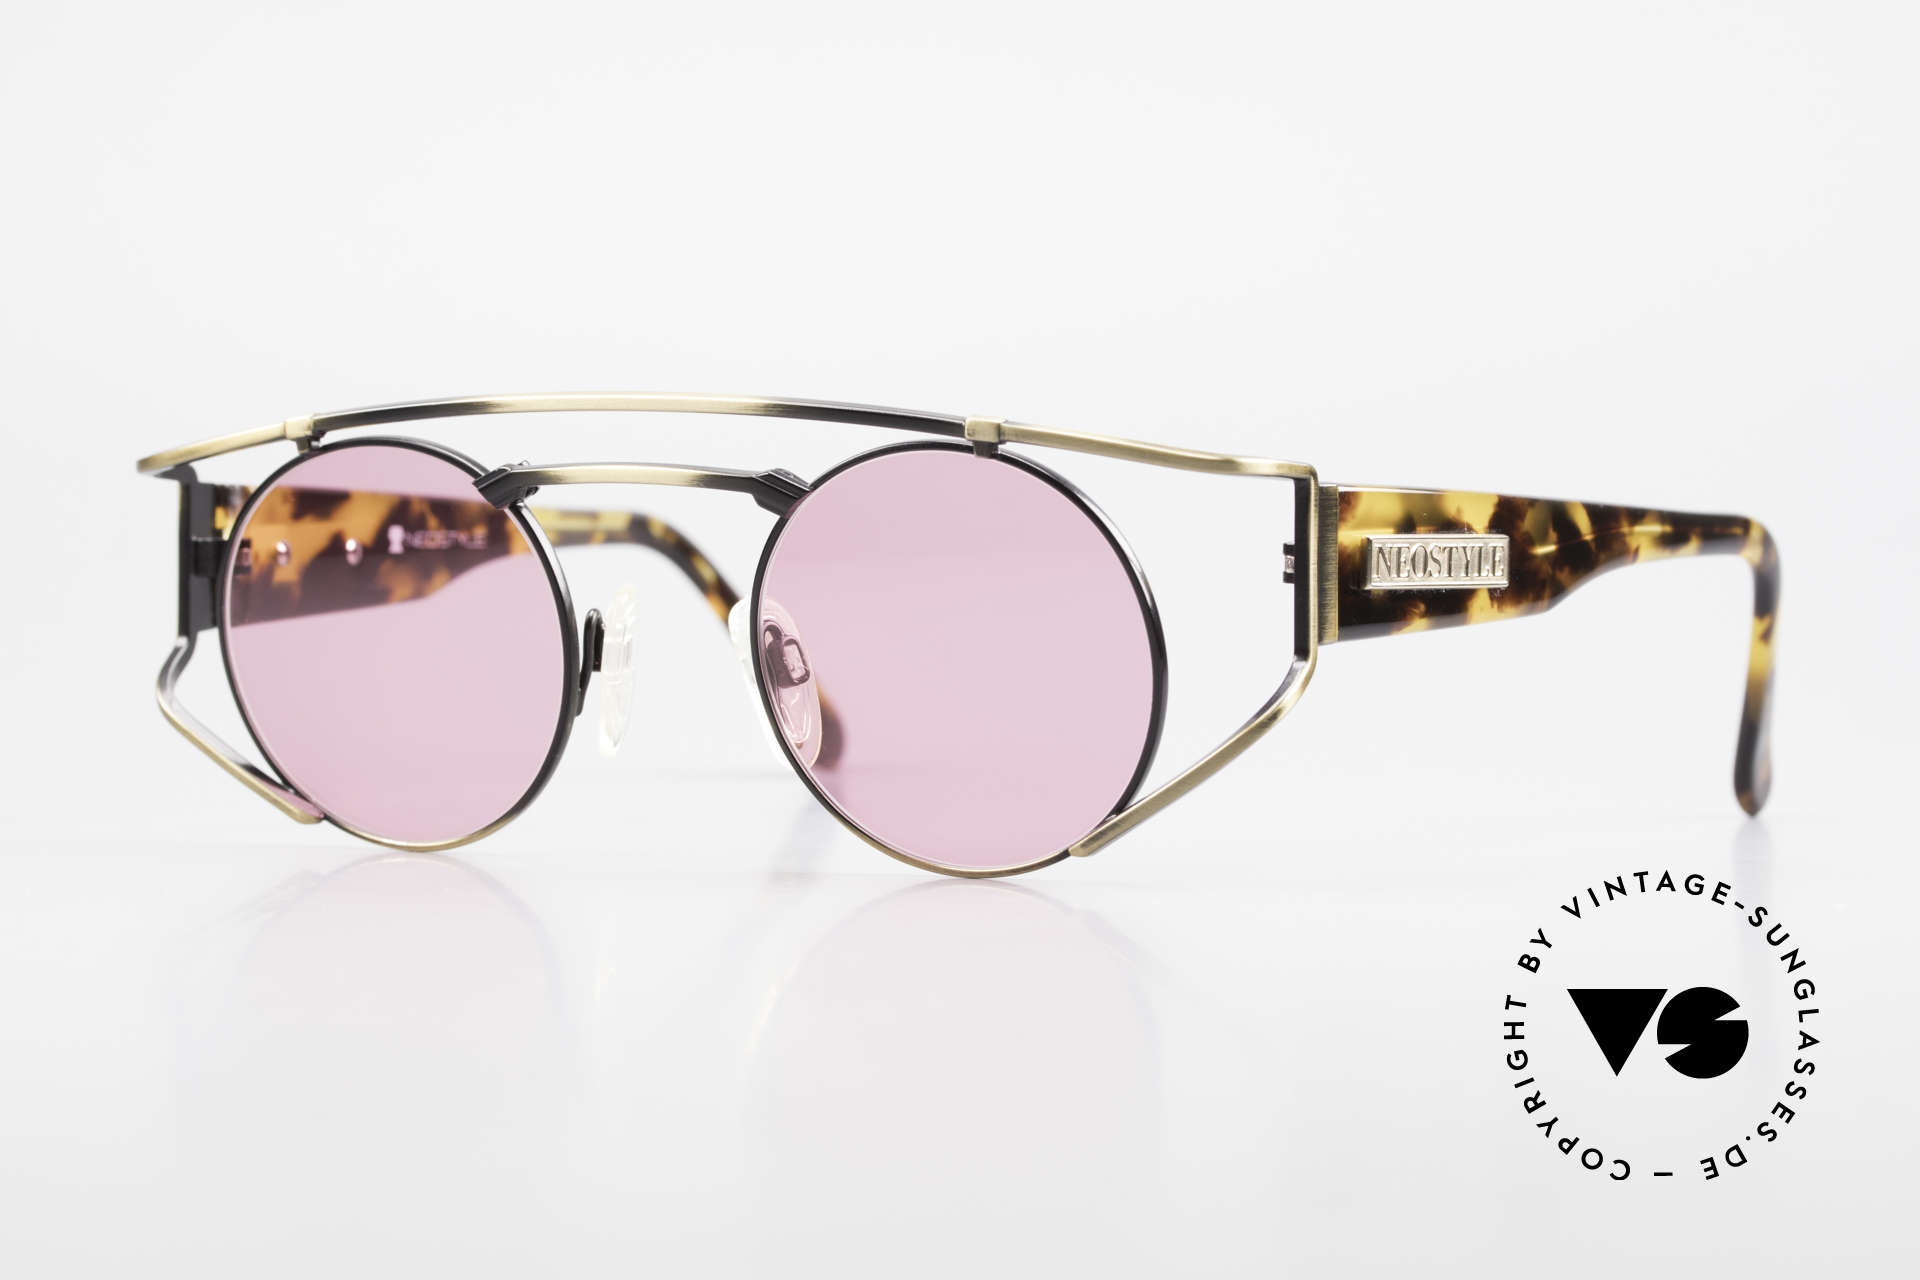 Neostyle Superstar 1 Steampunk Sunglasses Pink, NEOSTYLE Superstar 1, col. 801, size 45-23 frame, Made for Men and Women